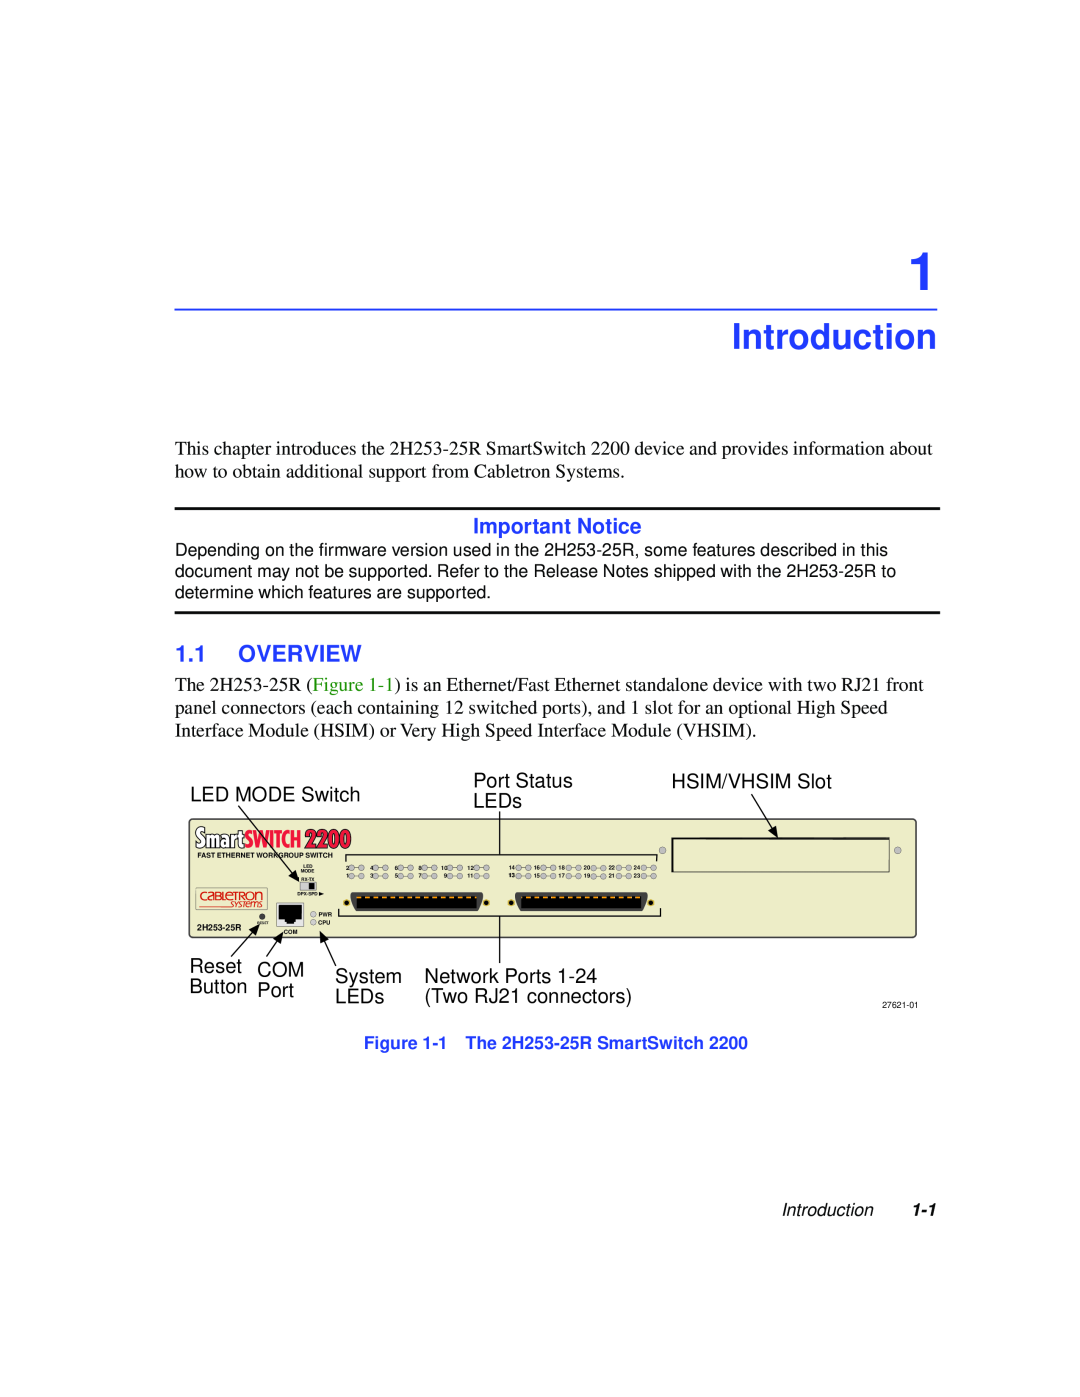 Cabletron Systems 2H253-25R manual Introduction, Overview, Important Notice 